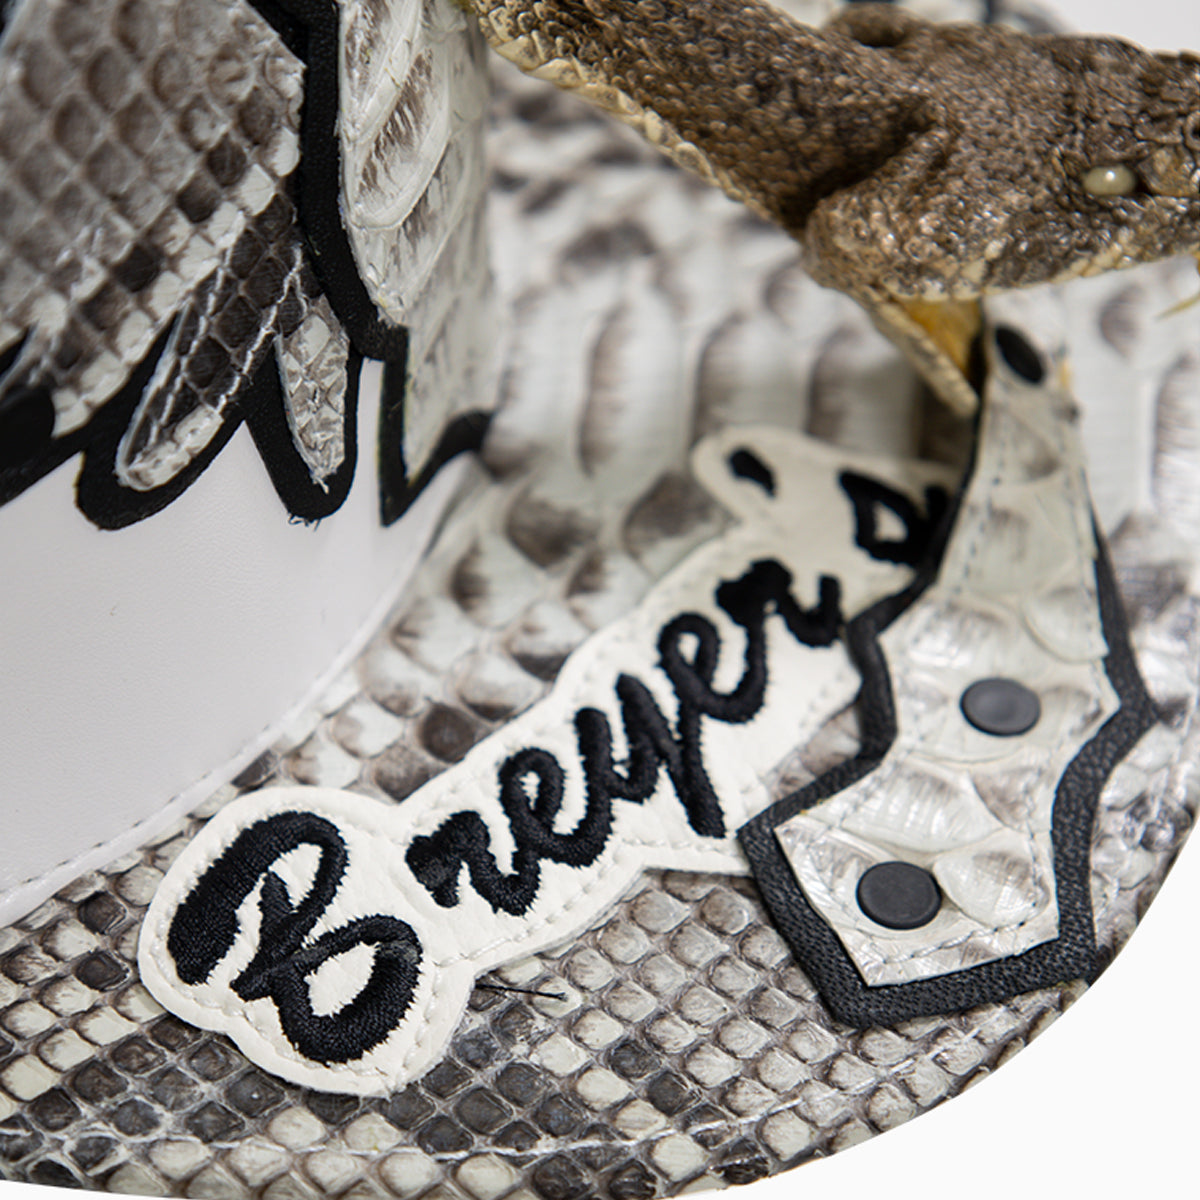 breyers-buck-50-leather-hat-with-faux-snake-skin-visor-breyers-slh-white-gry